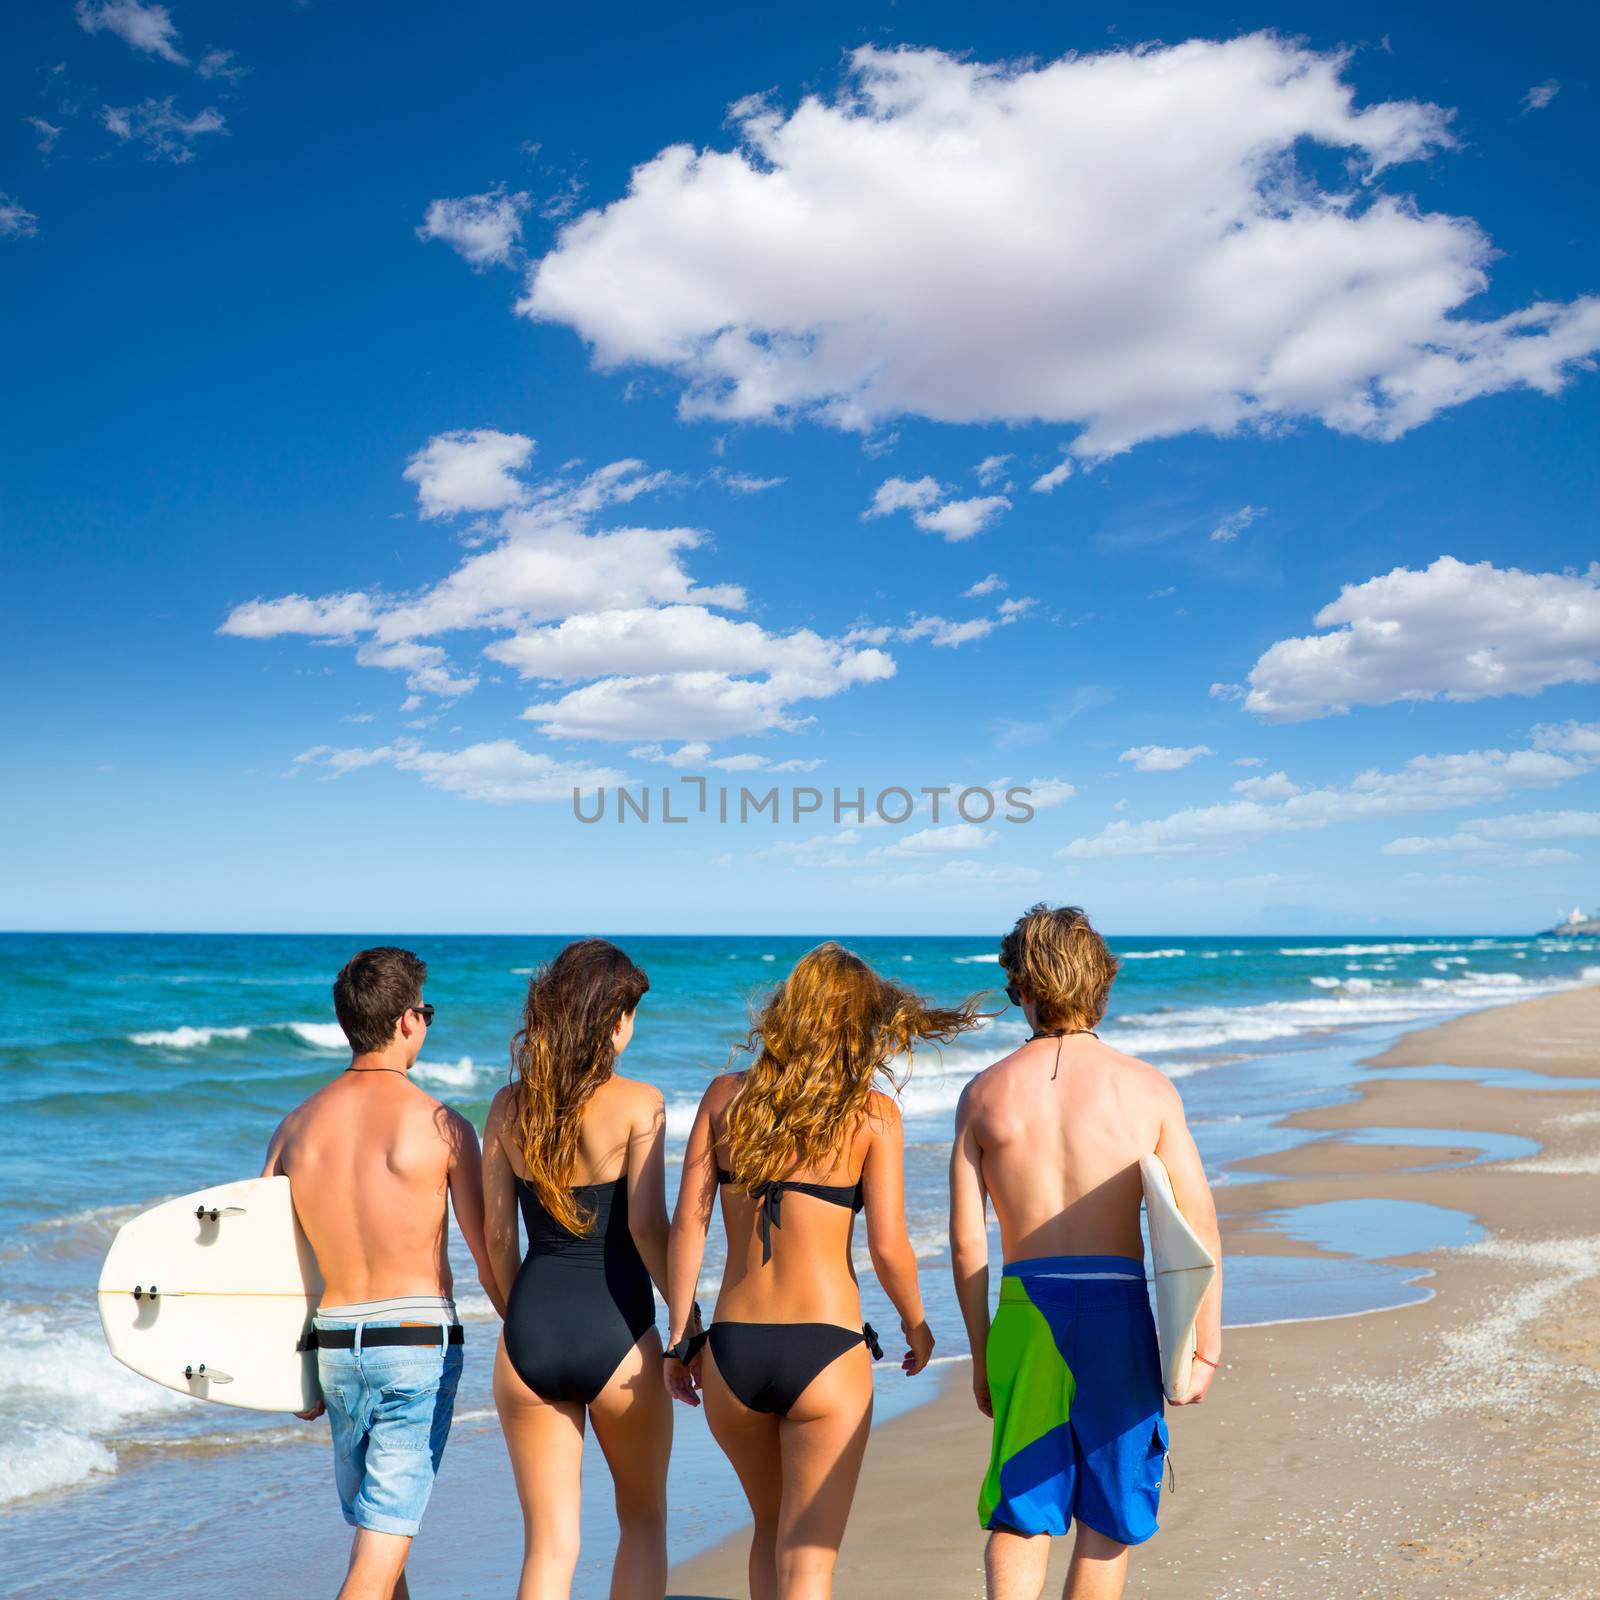 Teen surfers group of boys and girls walking rear view on beach